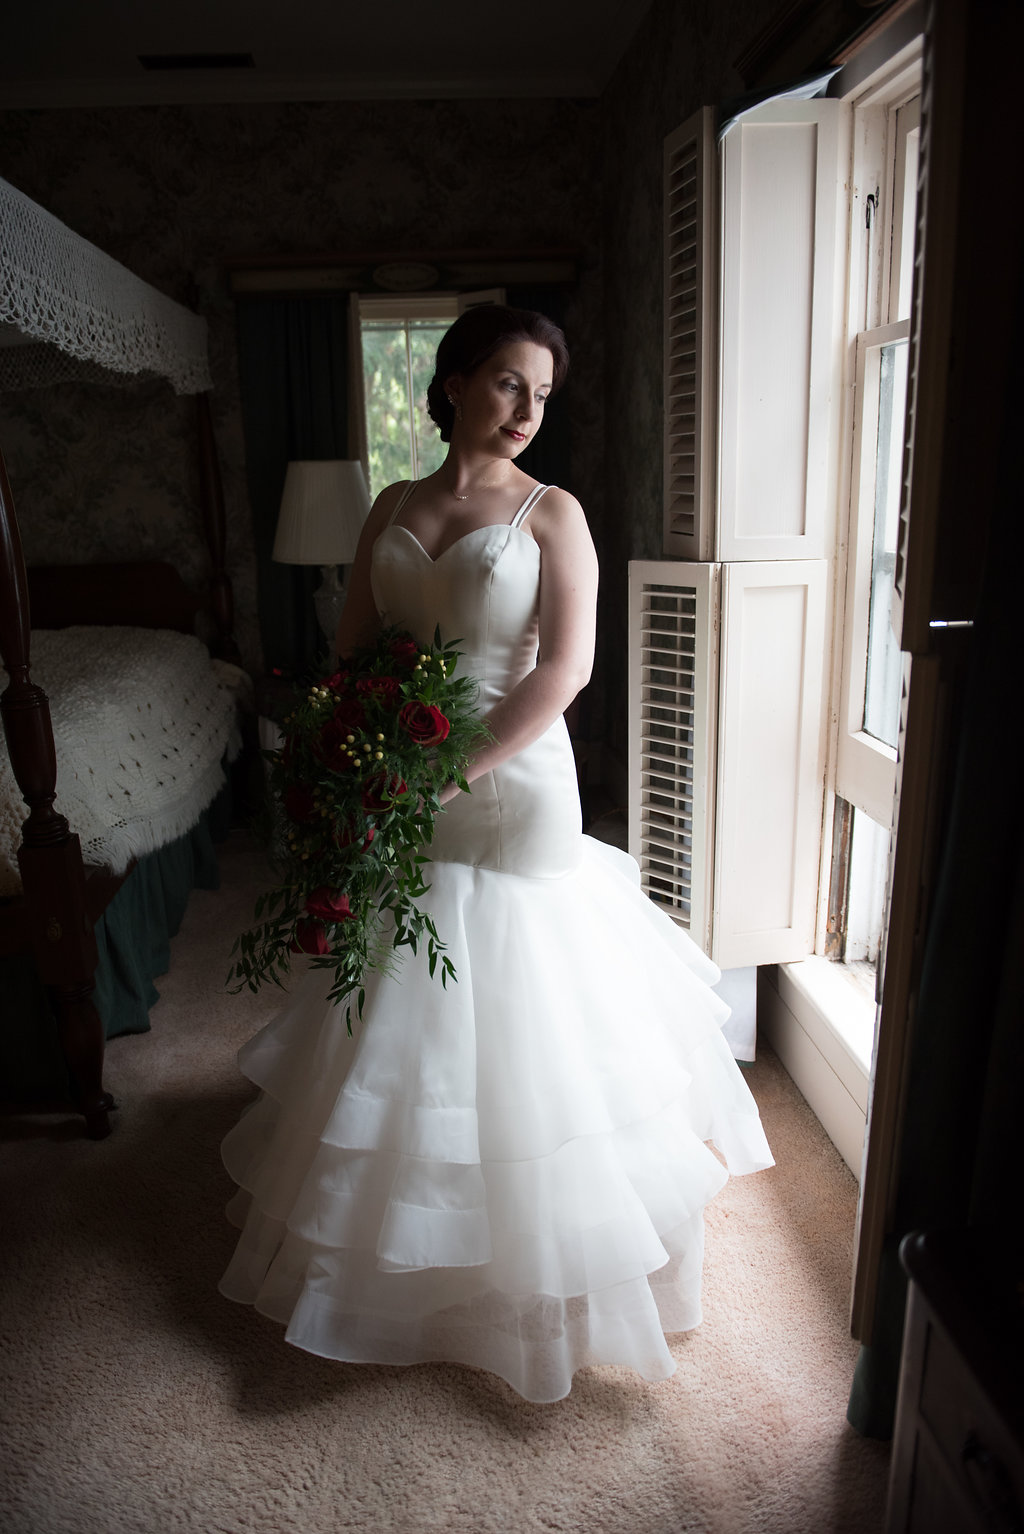 Elegant bride glances down her shoulder towards the window in the getting ready space